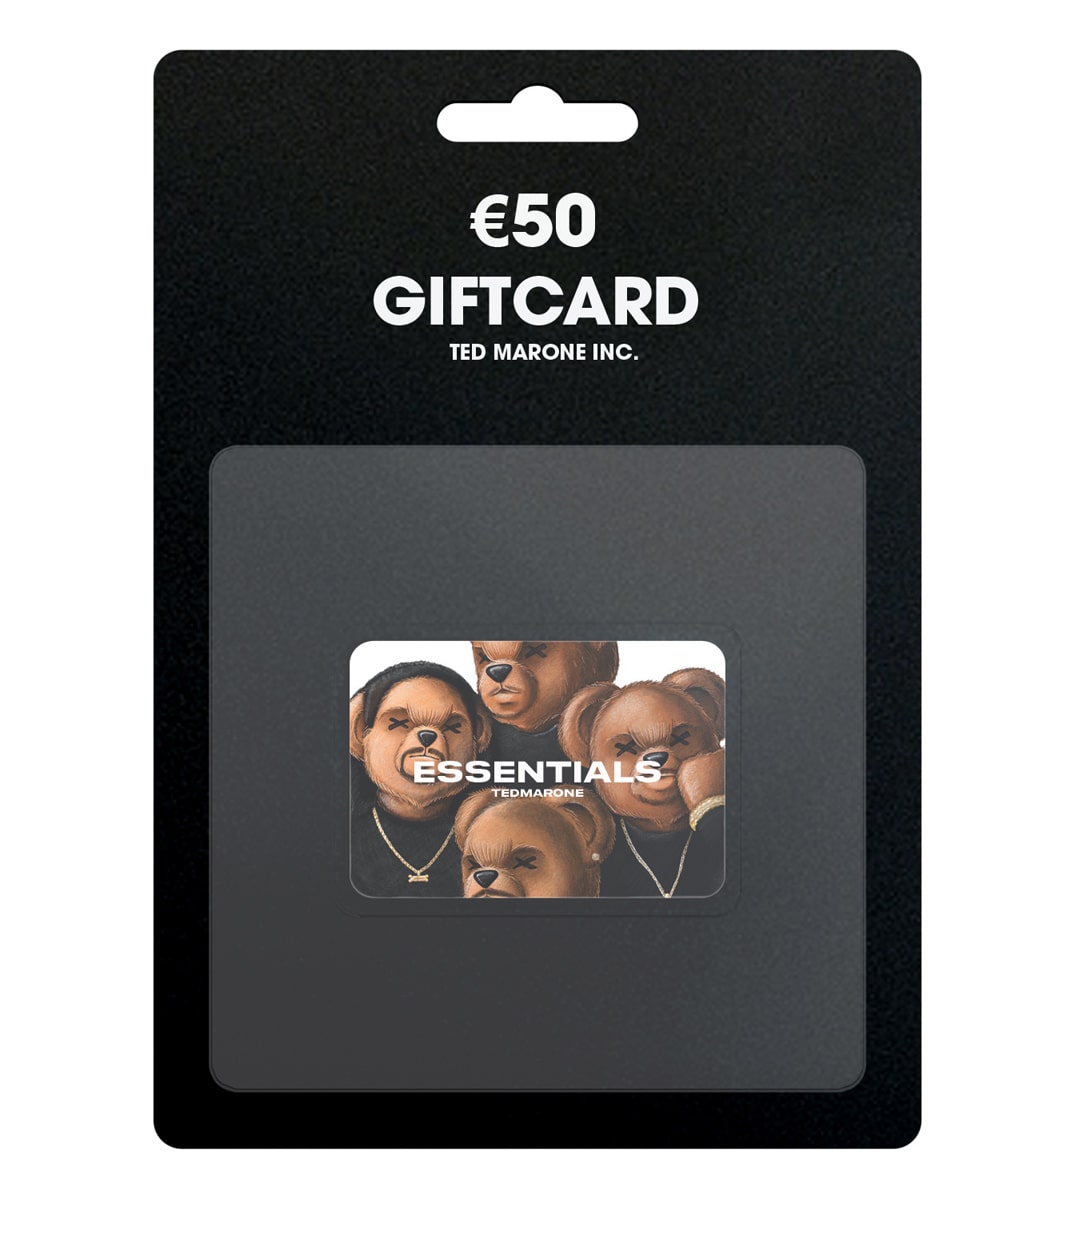 €500,- GIFTCARD